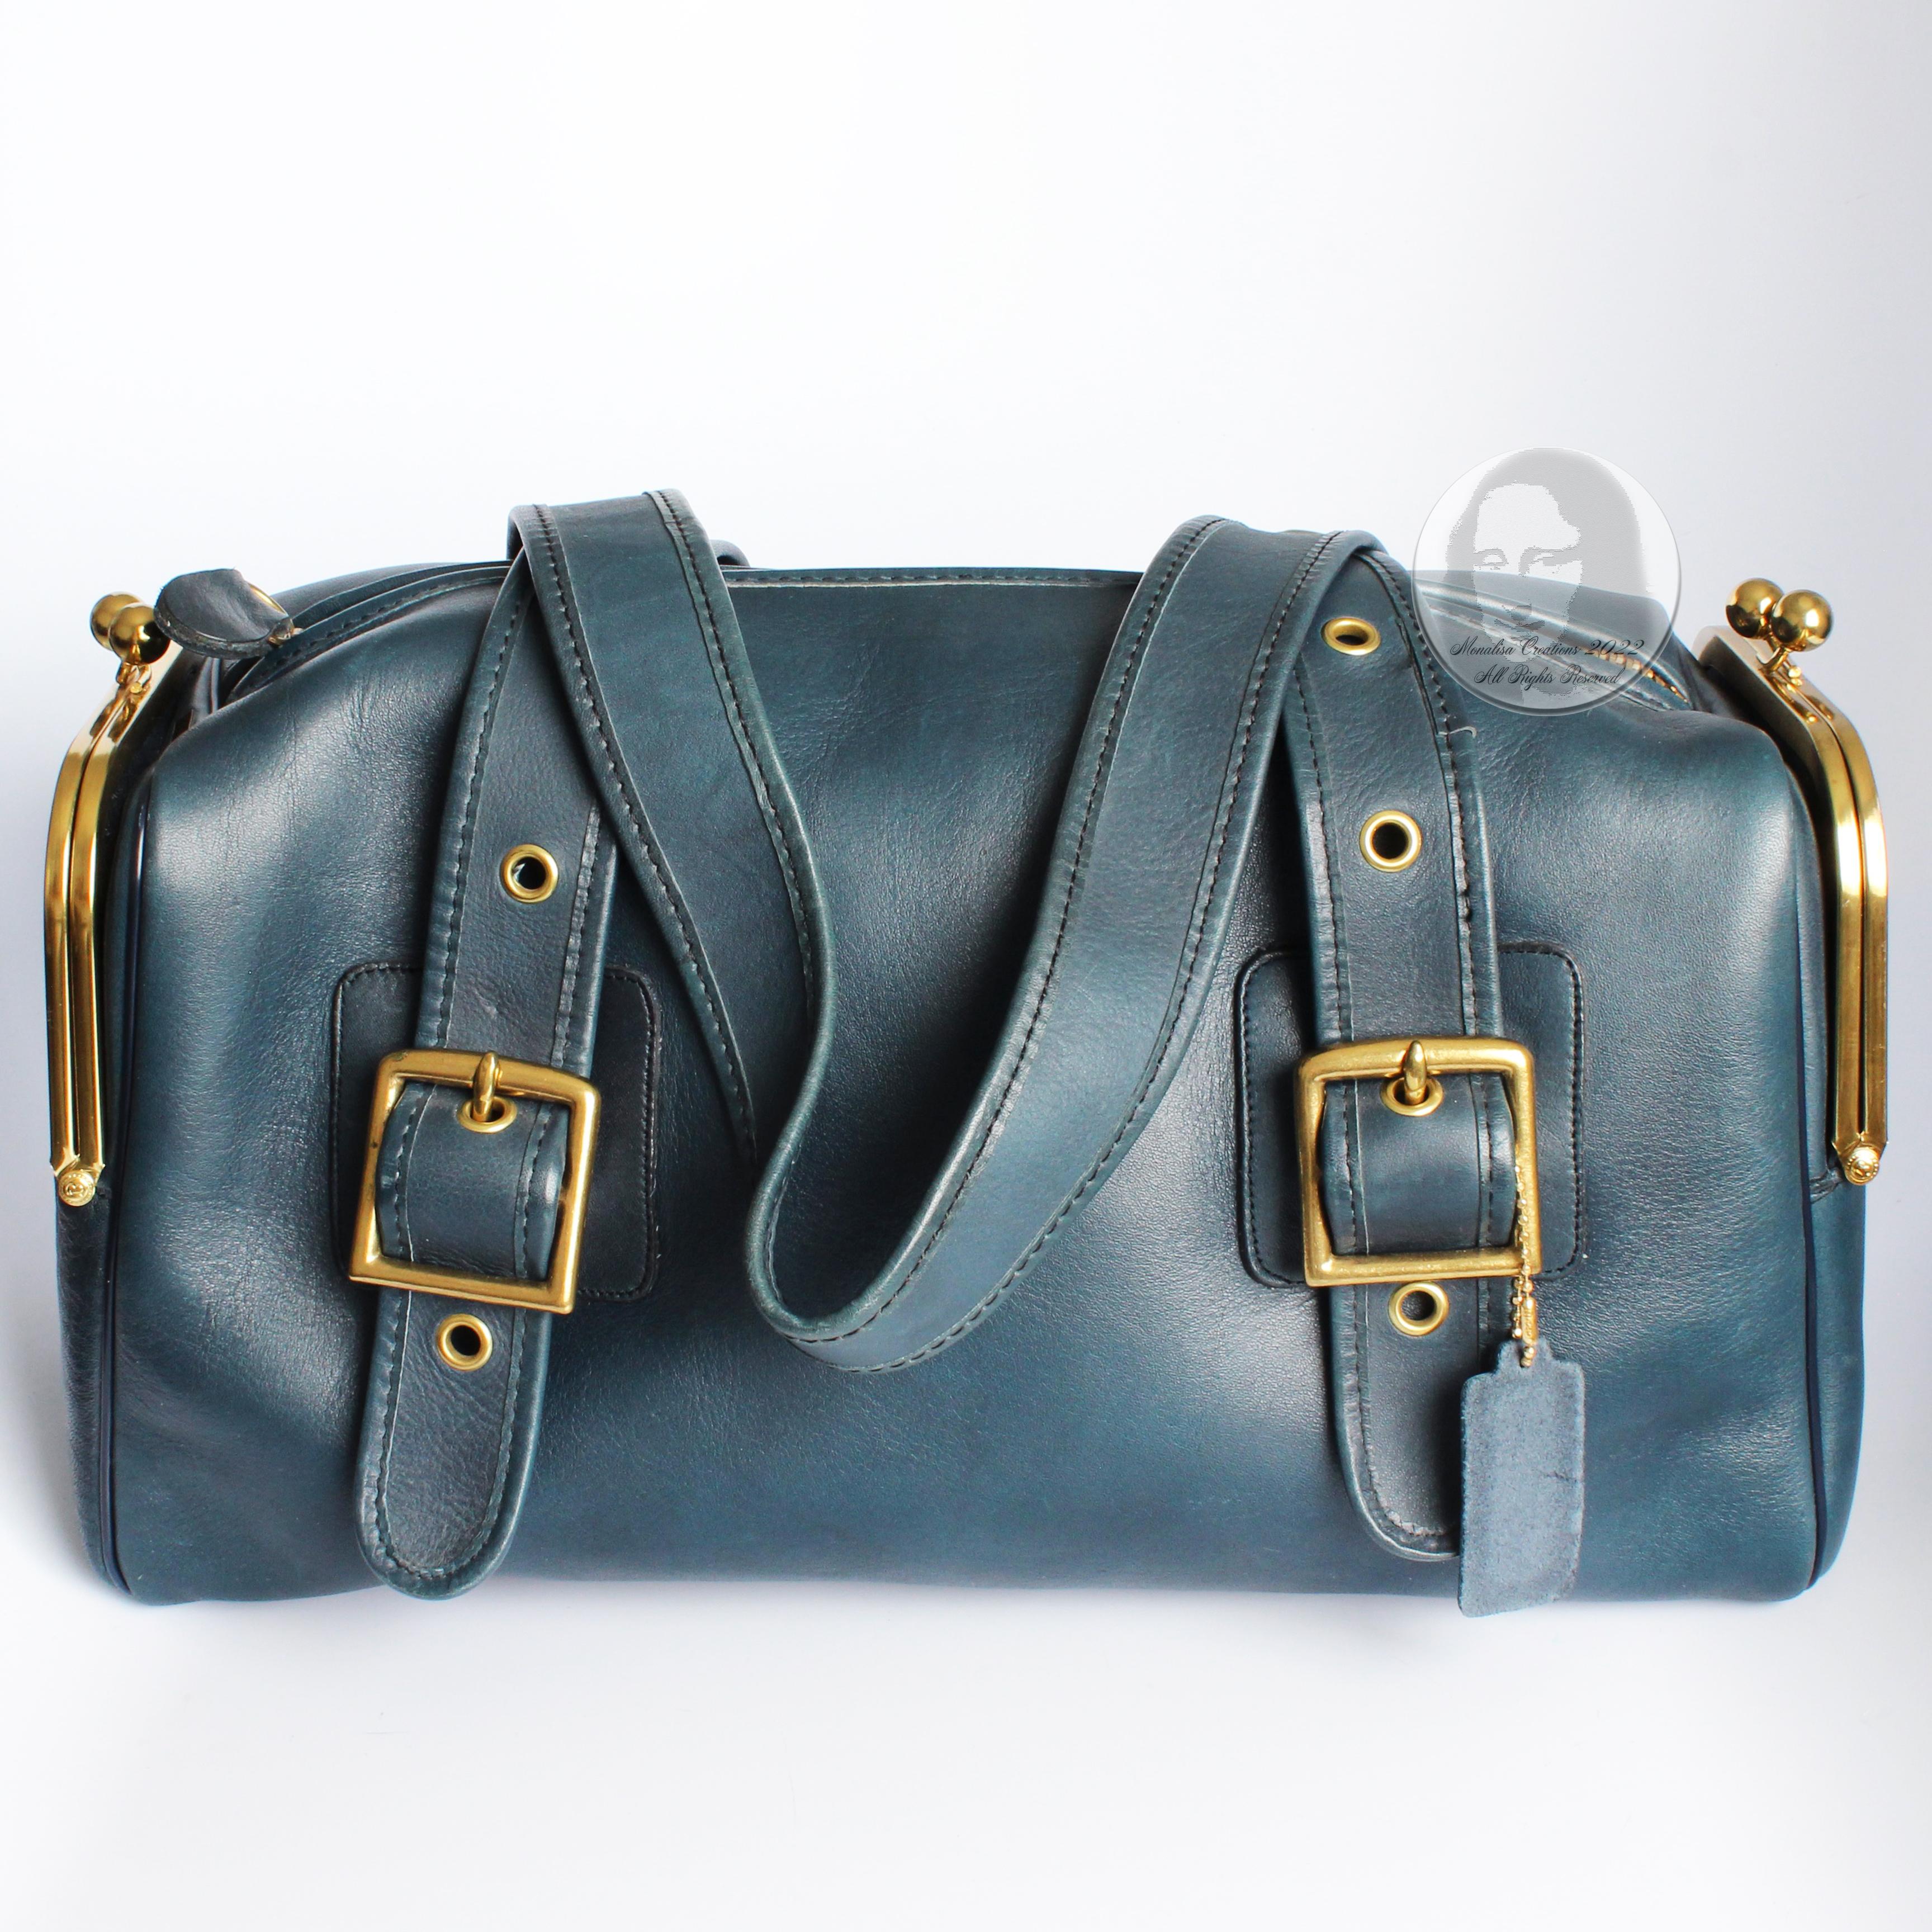 Bonnie Cashin for Coach RFD Mailbox Bag or Tote Teal Blue Leather 70s Vintage  1